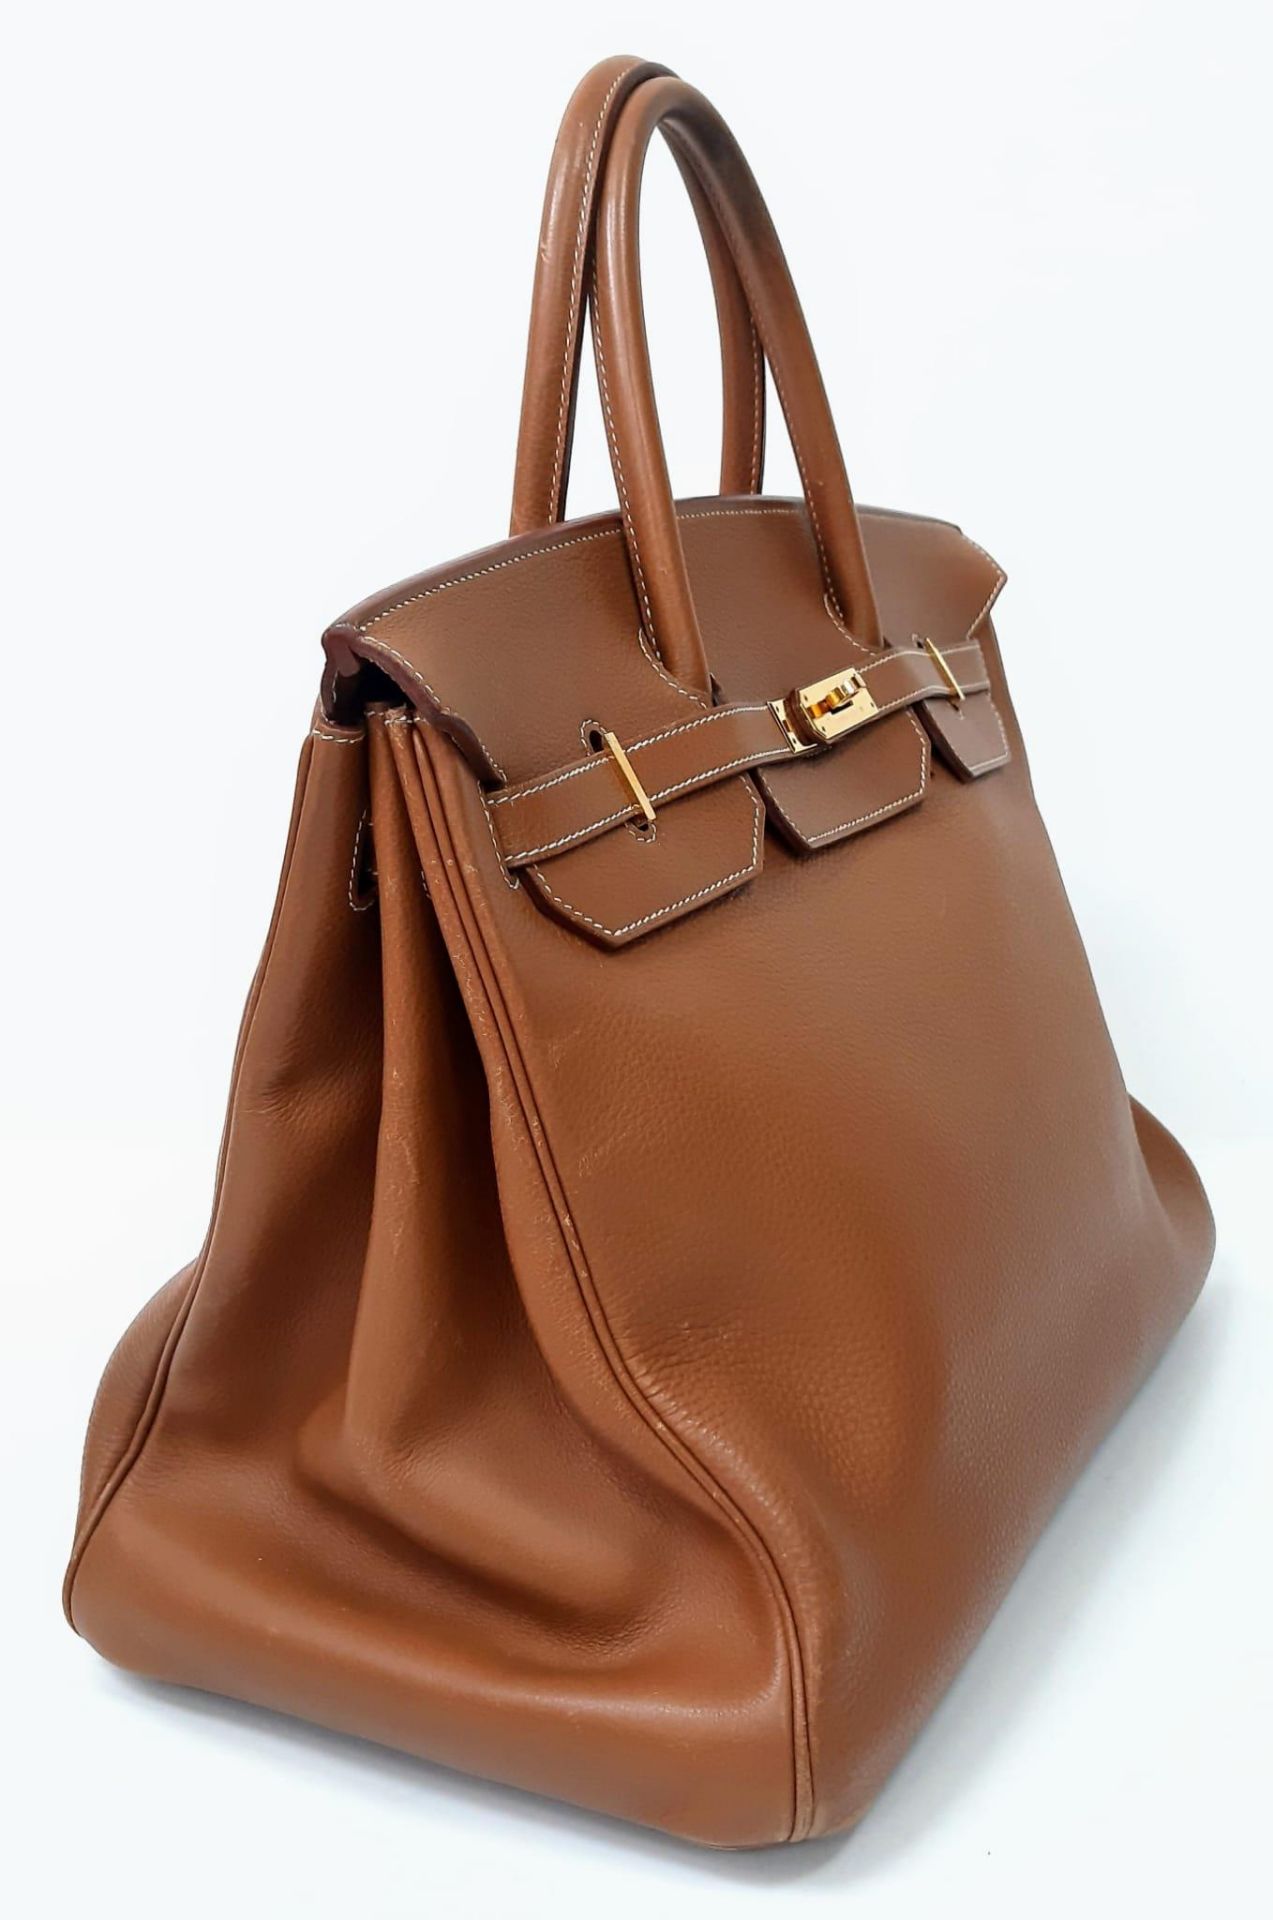 A Hermes Birkin Brown Leather Tote Bag. Handcrafted from the highest quality leather by skilled - Bild 3 aus 17